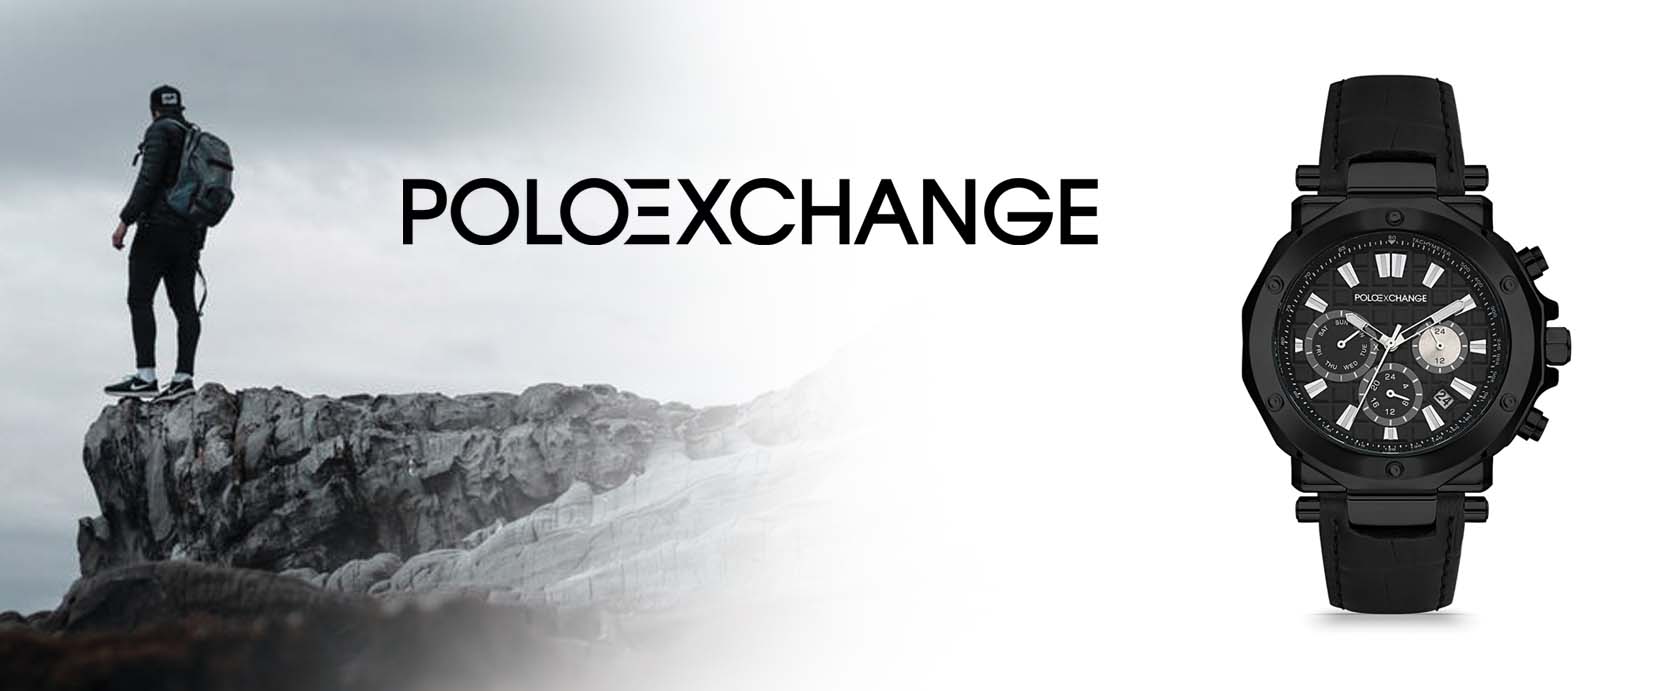 (Polo exchange ) پولو ایکس چنج